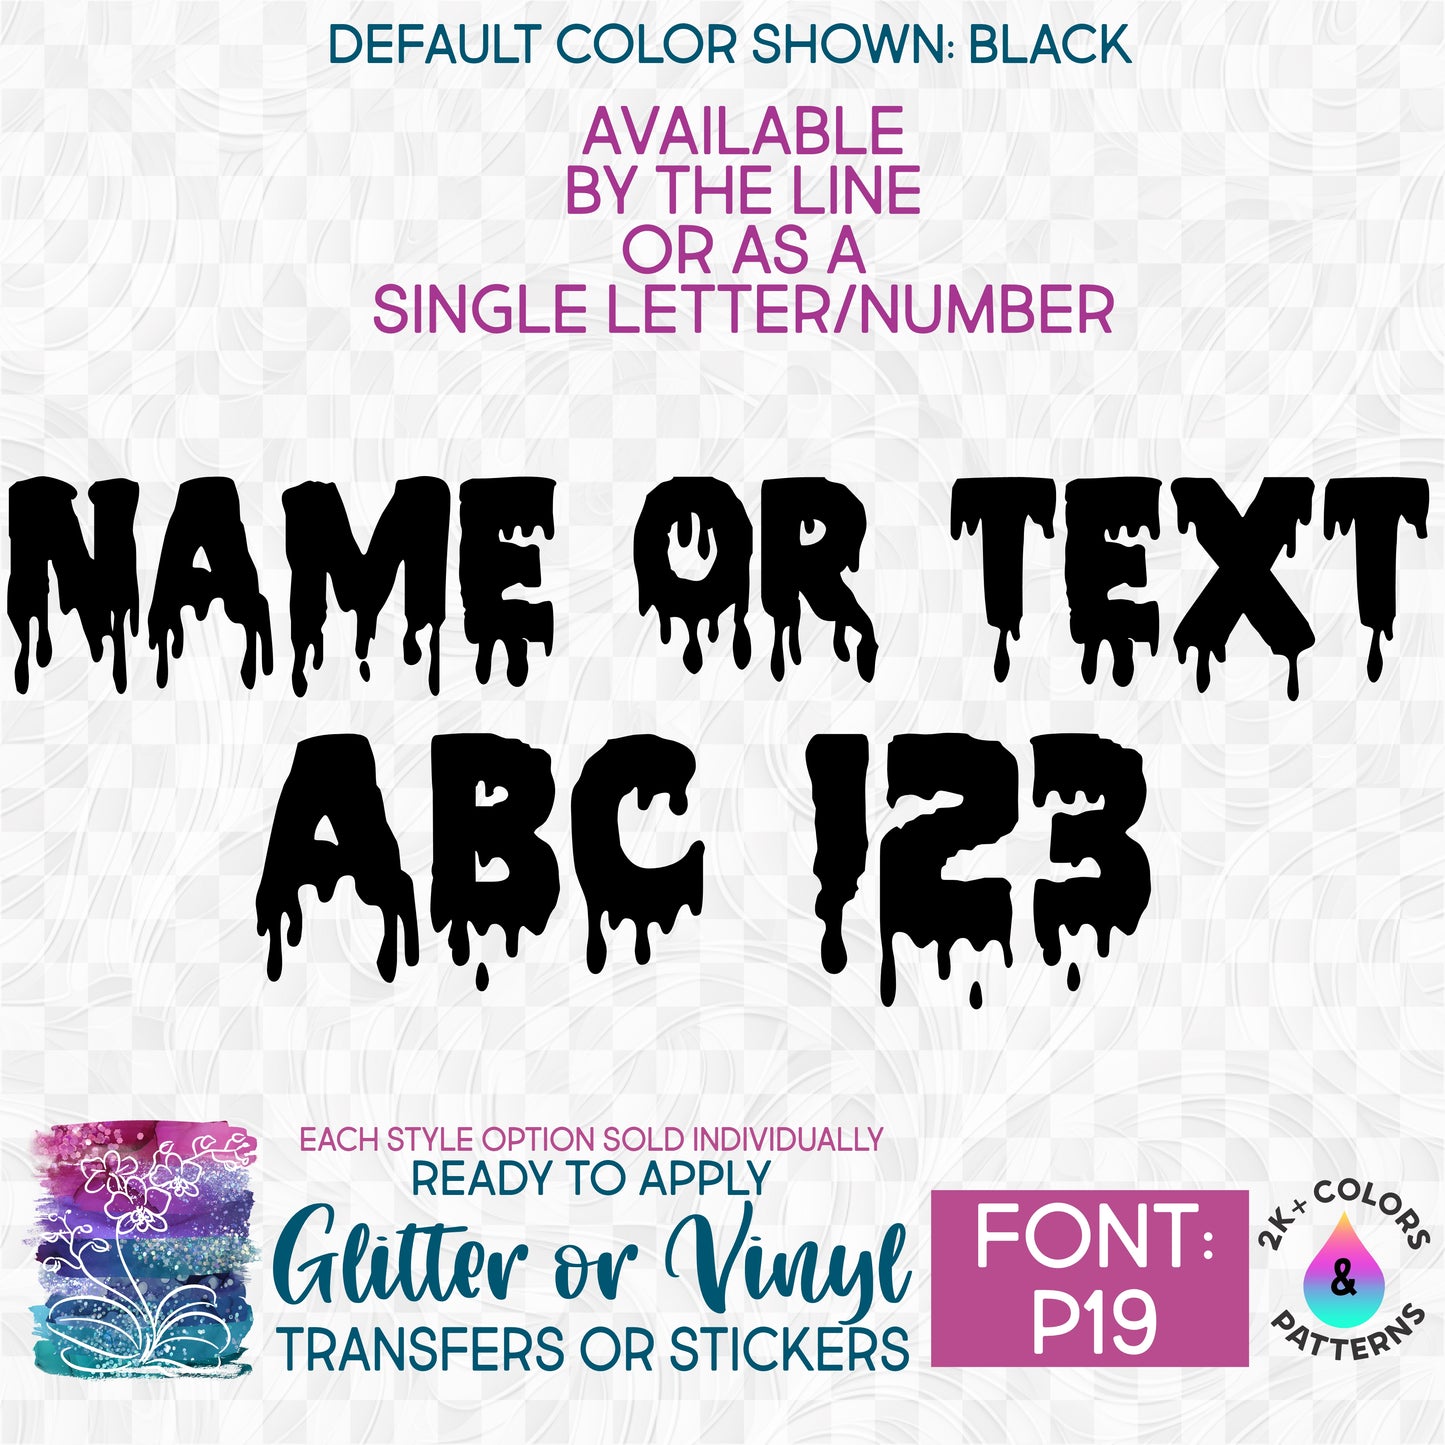 (s097-P19) Block Font Custom Name Text or Single Letter Number Dripping Drips Glitter or Vinyl Iron-On Transfer or Sticker